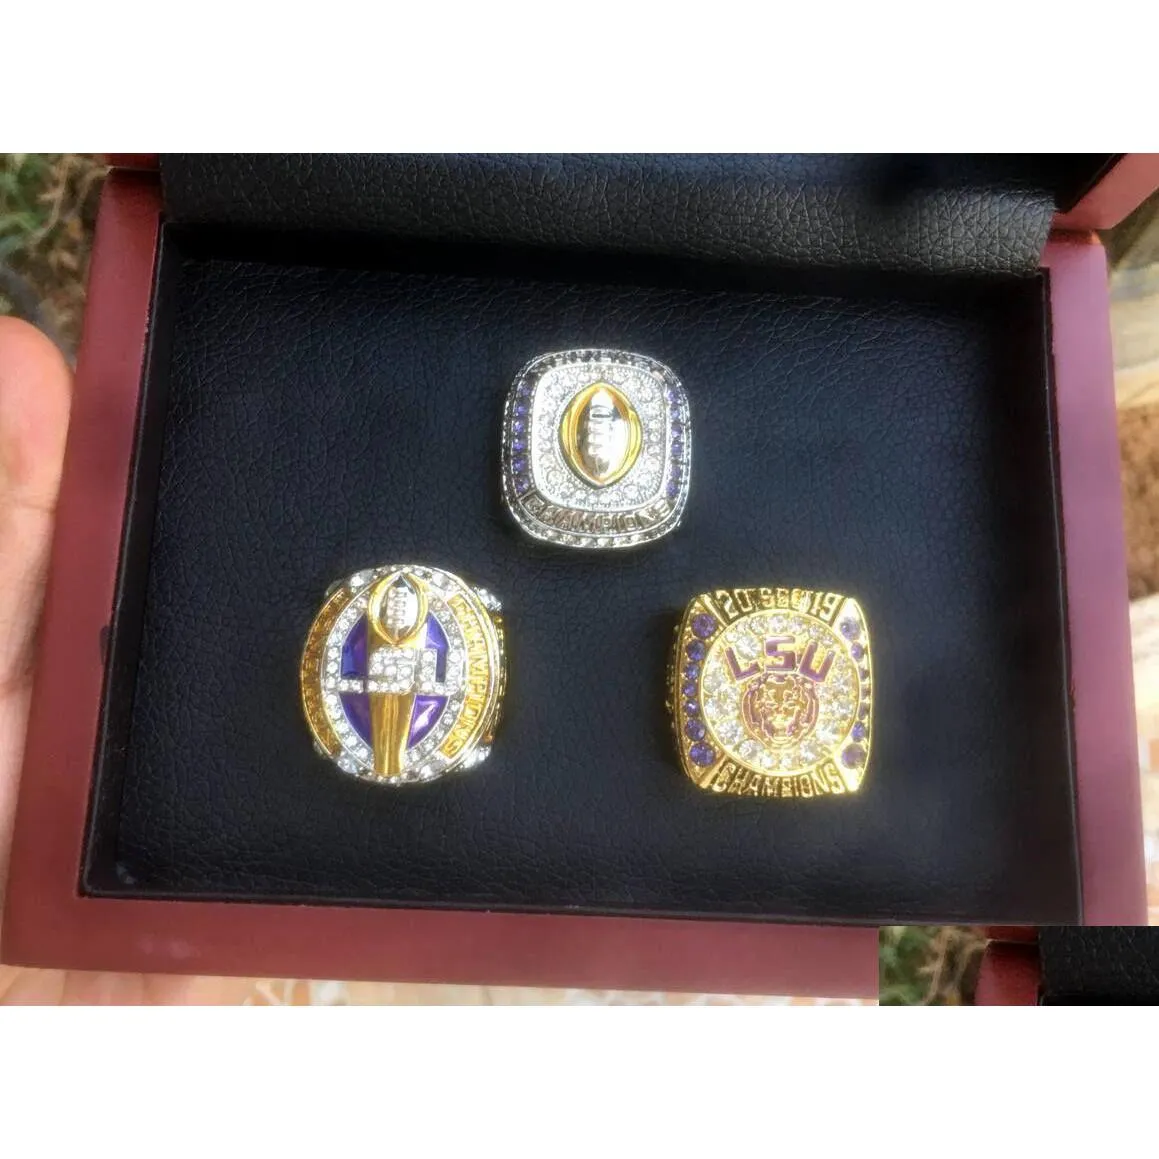 Cluster Rings 3pcs Lsu Tiger S Orgeron Nationals Team Champions Championship Ring with Wooden Box Sport Souvenir Men Fan Gift Wholesal Dh92e